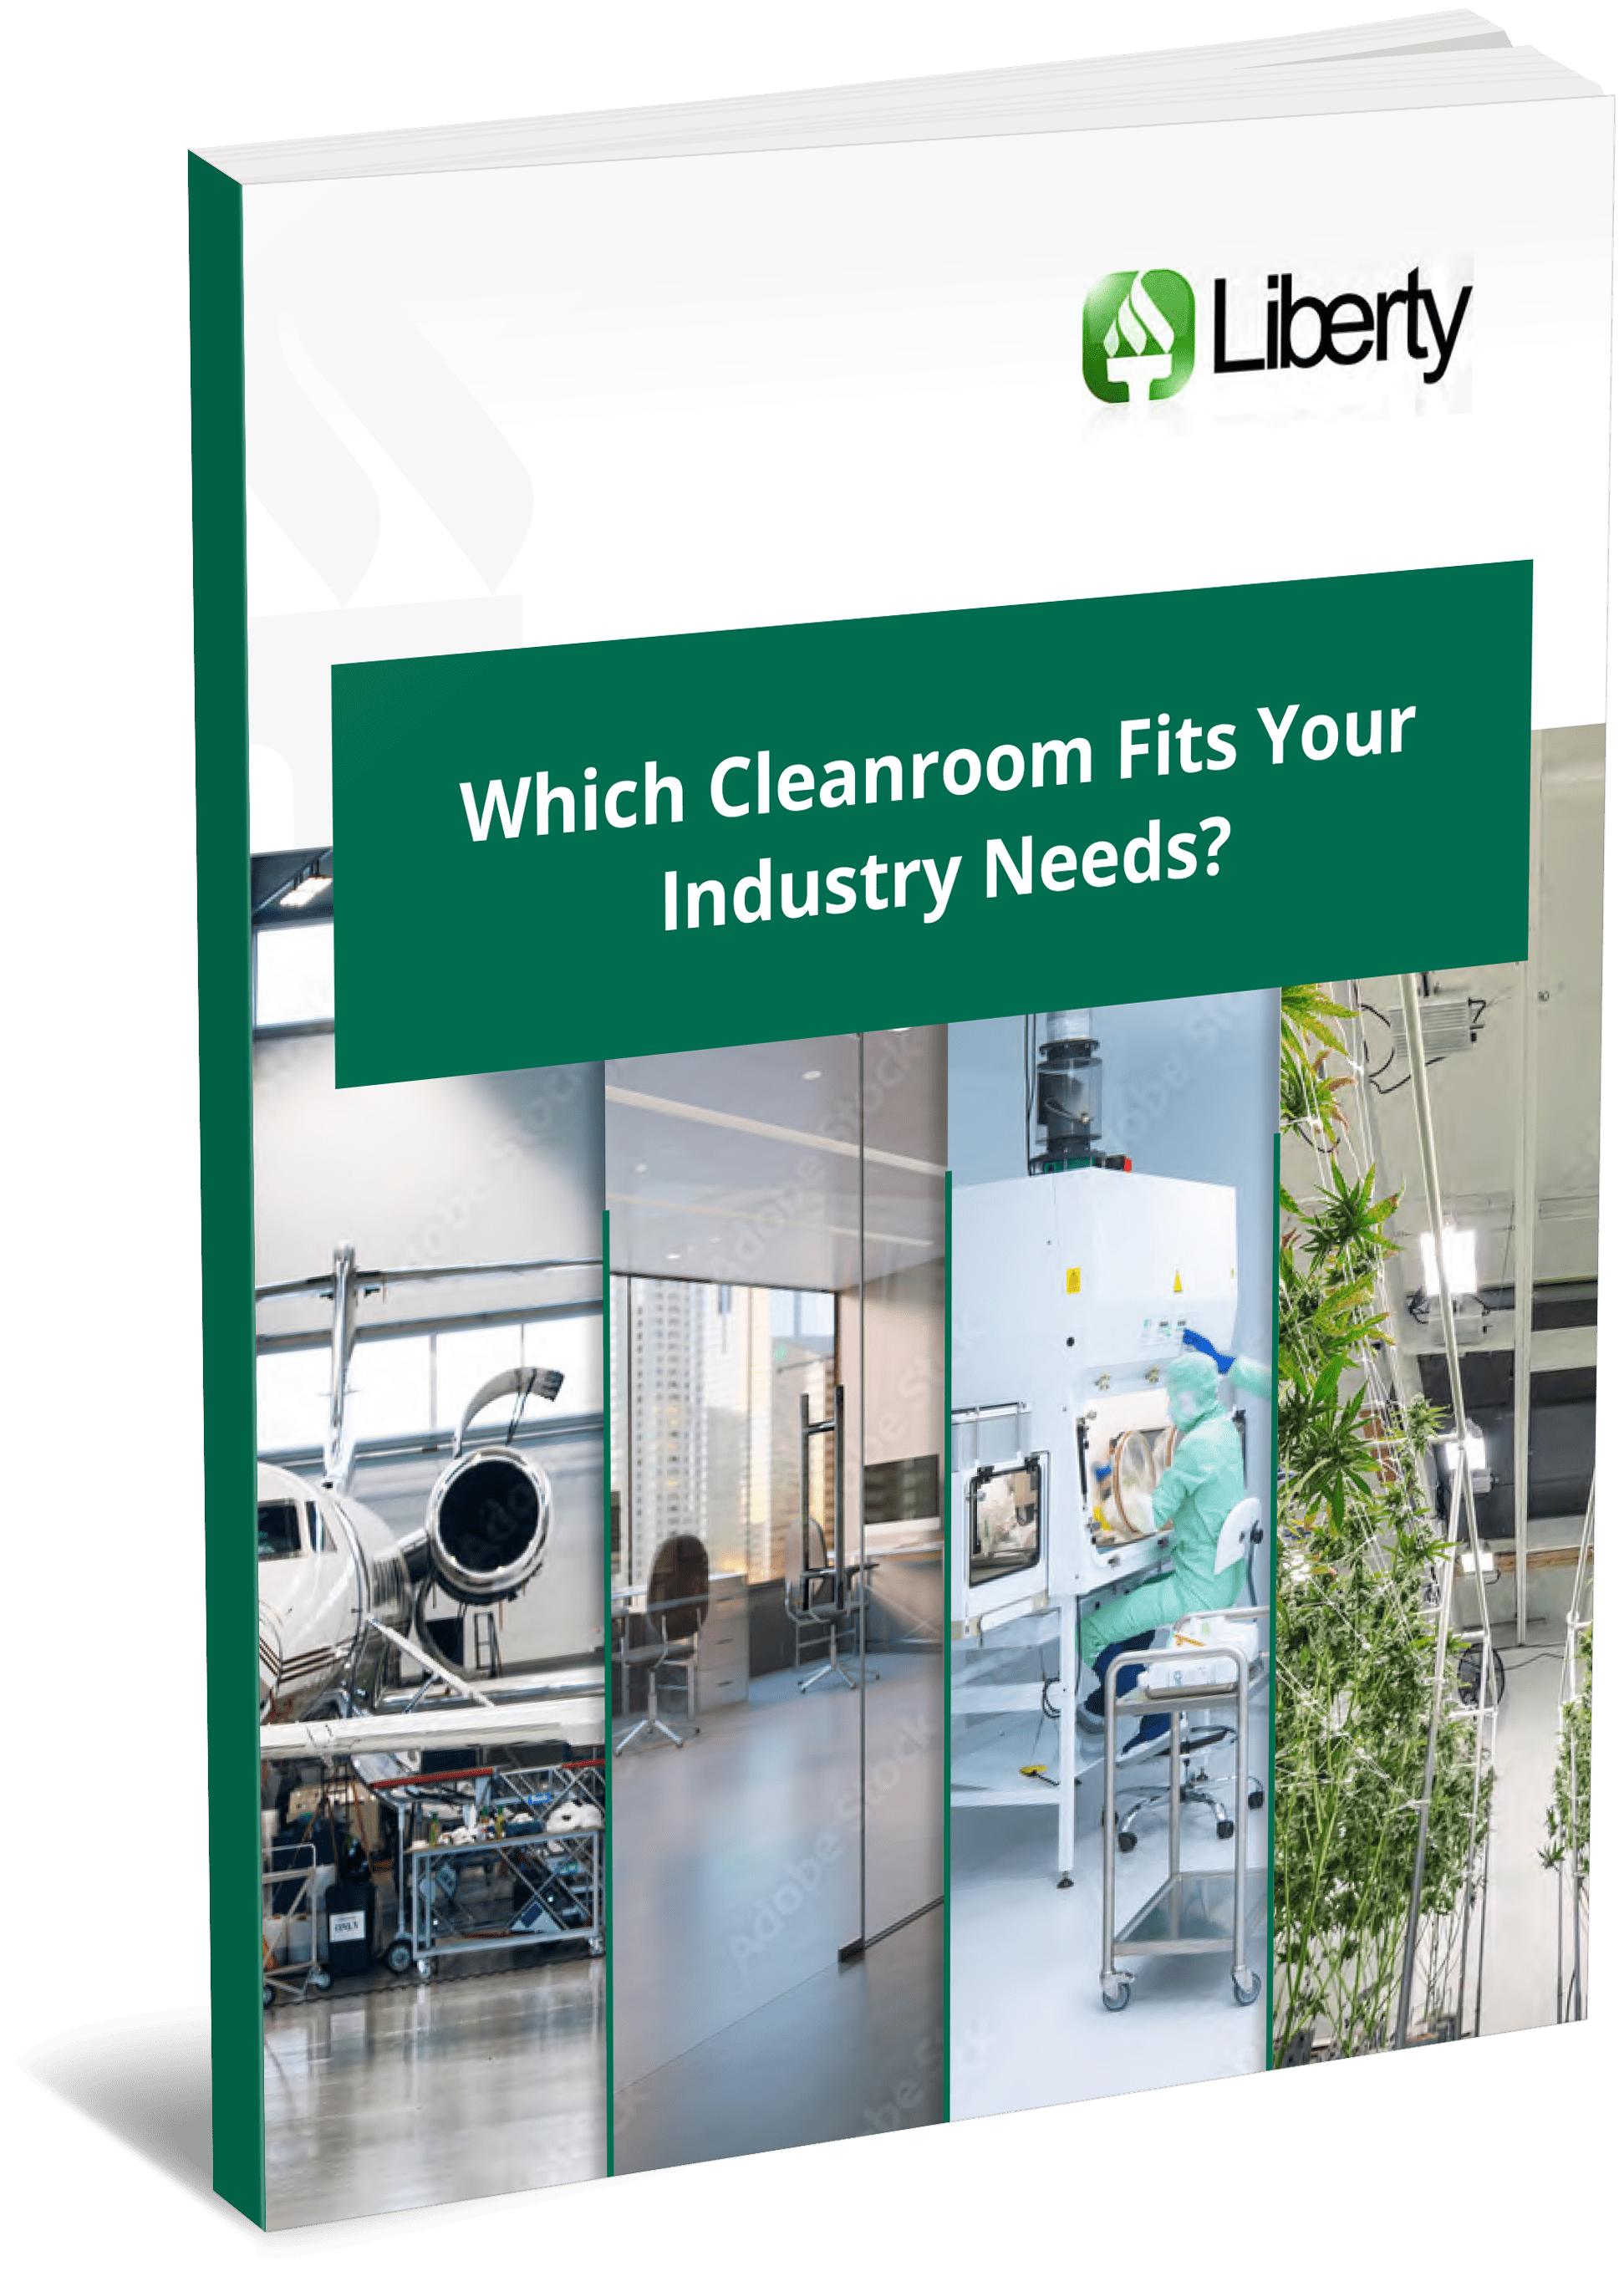 Which Cleanroom Fits Your Industry Needs?